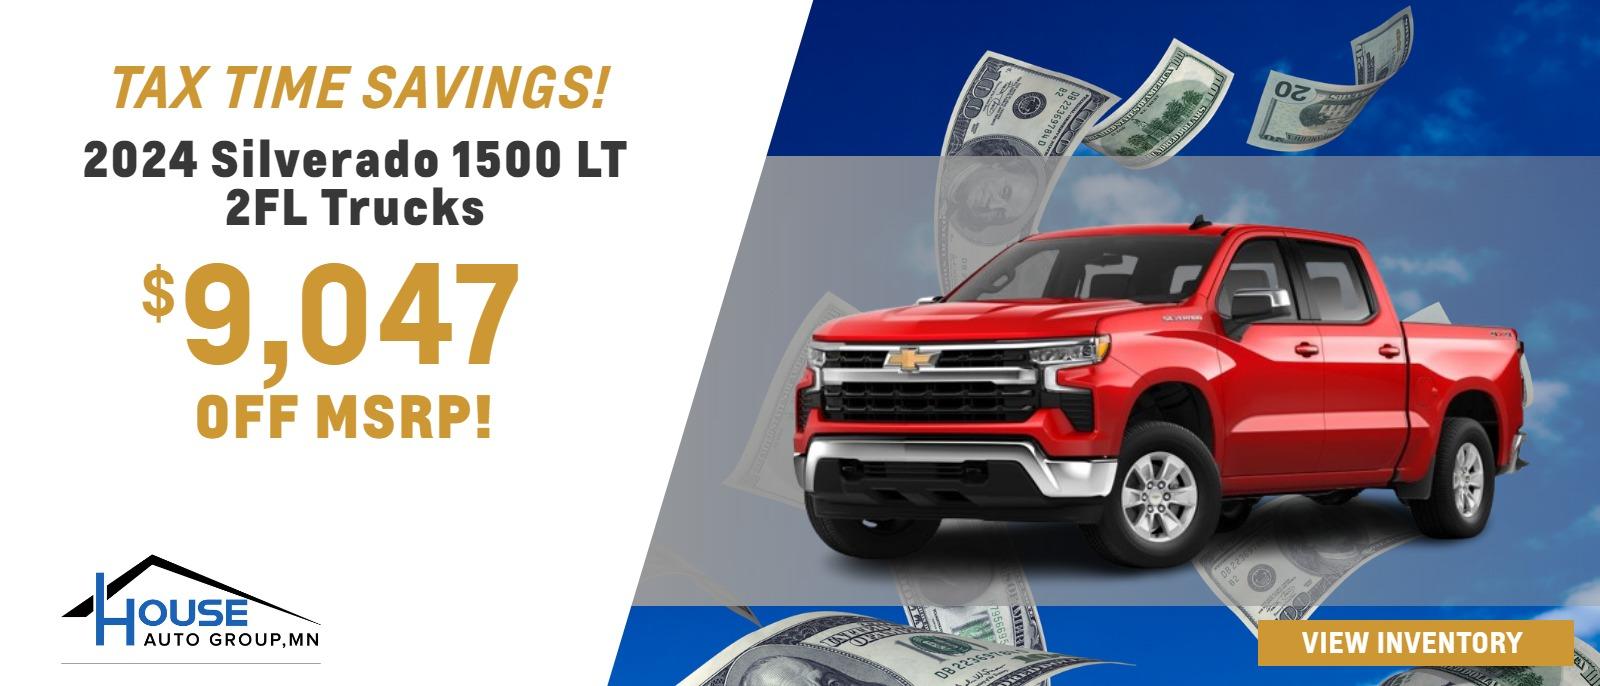 2024 Silverado 1500 LT 2FL Trucks - $9,047 Off MSRP! (Includes $2,500 bonus for owners/lessees of 2010 or newer Chevrolet models and $1,000 trade-in bonus for 2010 or newer vehicle.)